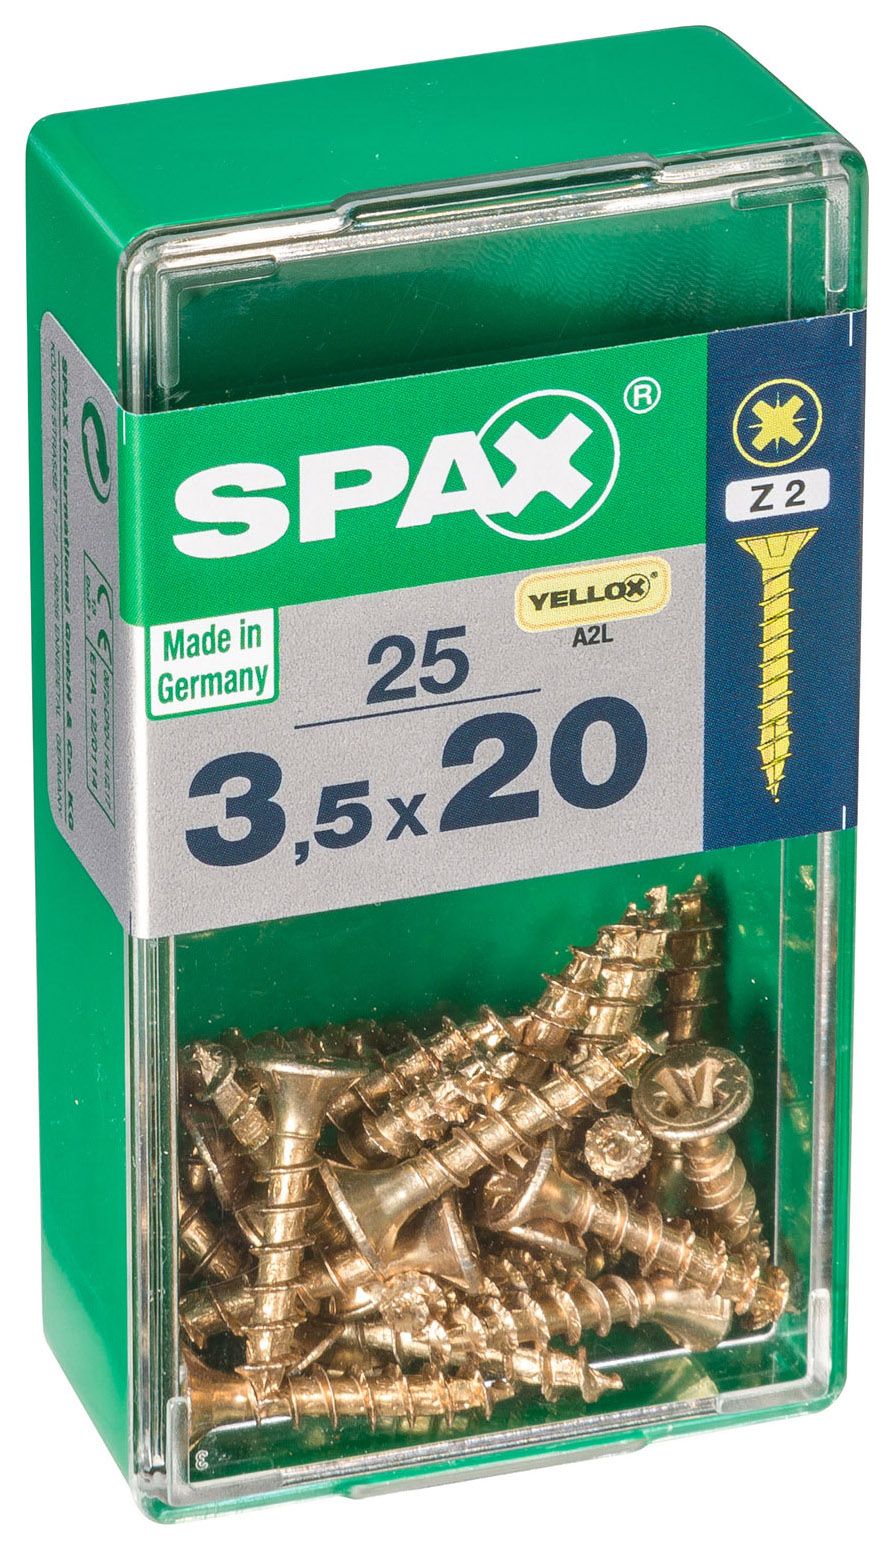 Image of Spax PZ Countersunk Zinc Yellow Screws - 3.5 x 20mm Pack of 25